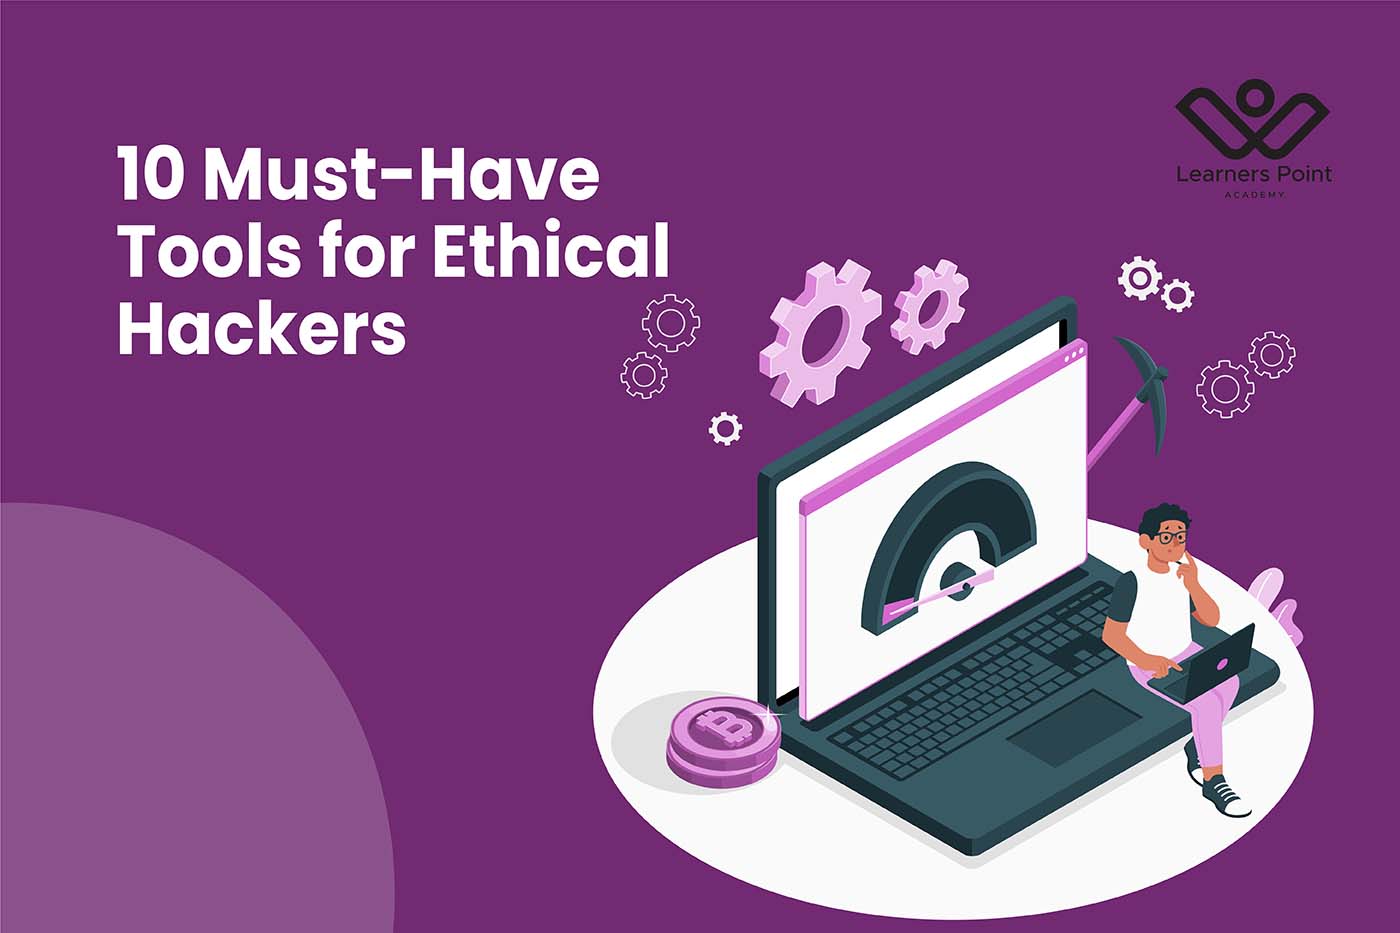 10 Must-Have Tools for Ethical Hackers